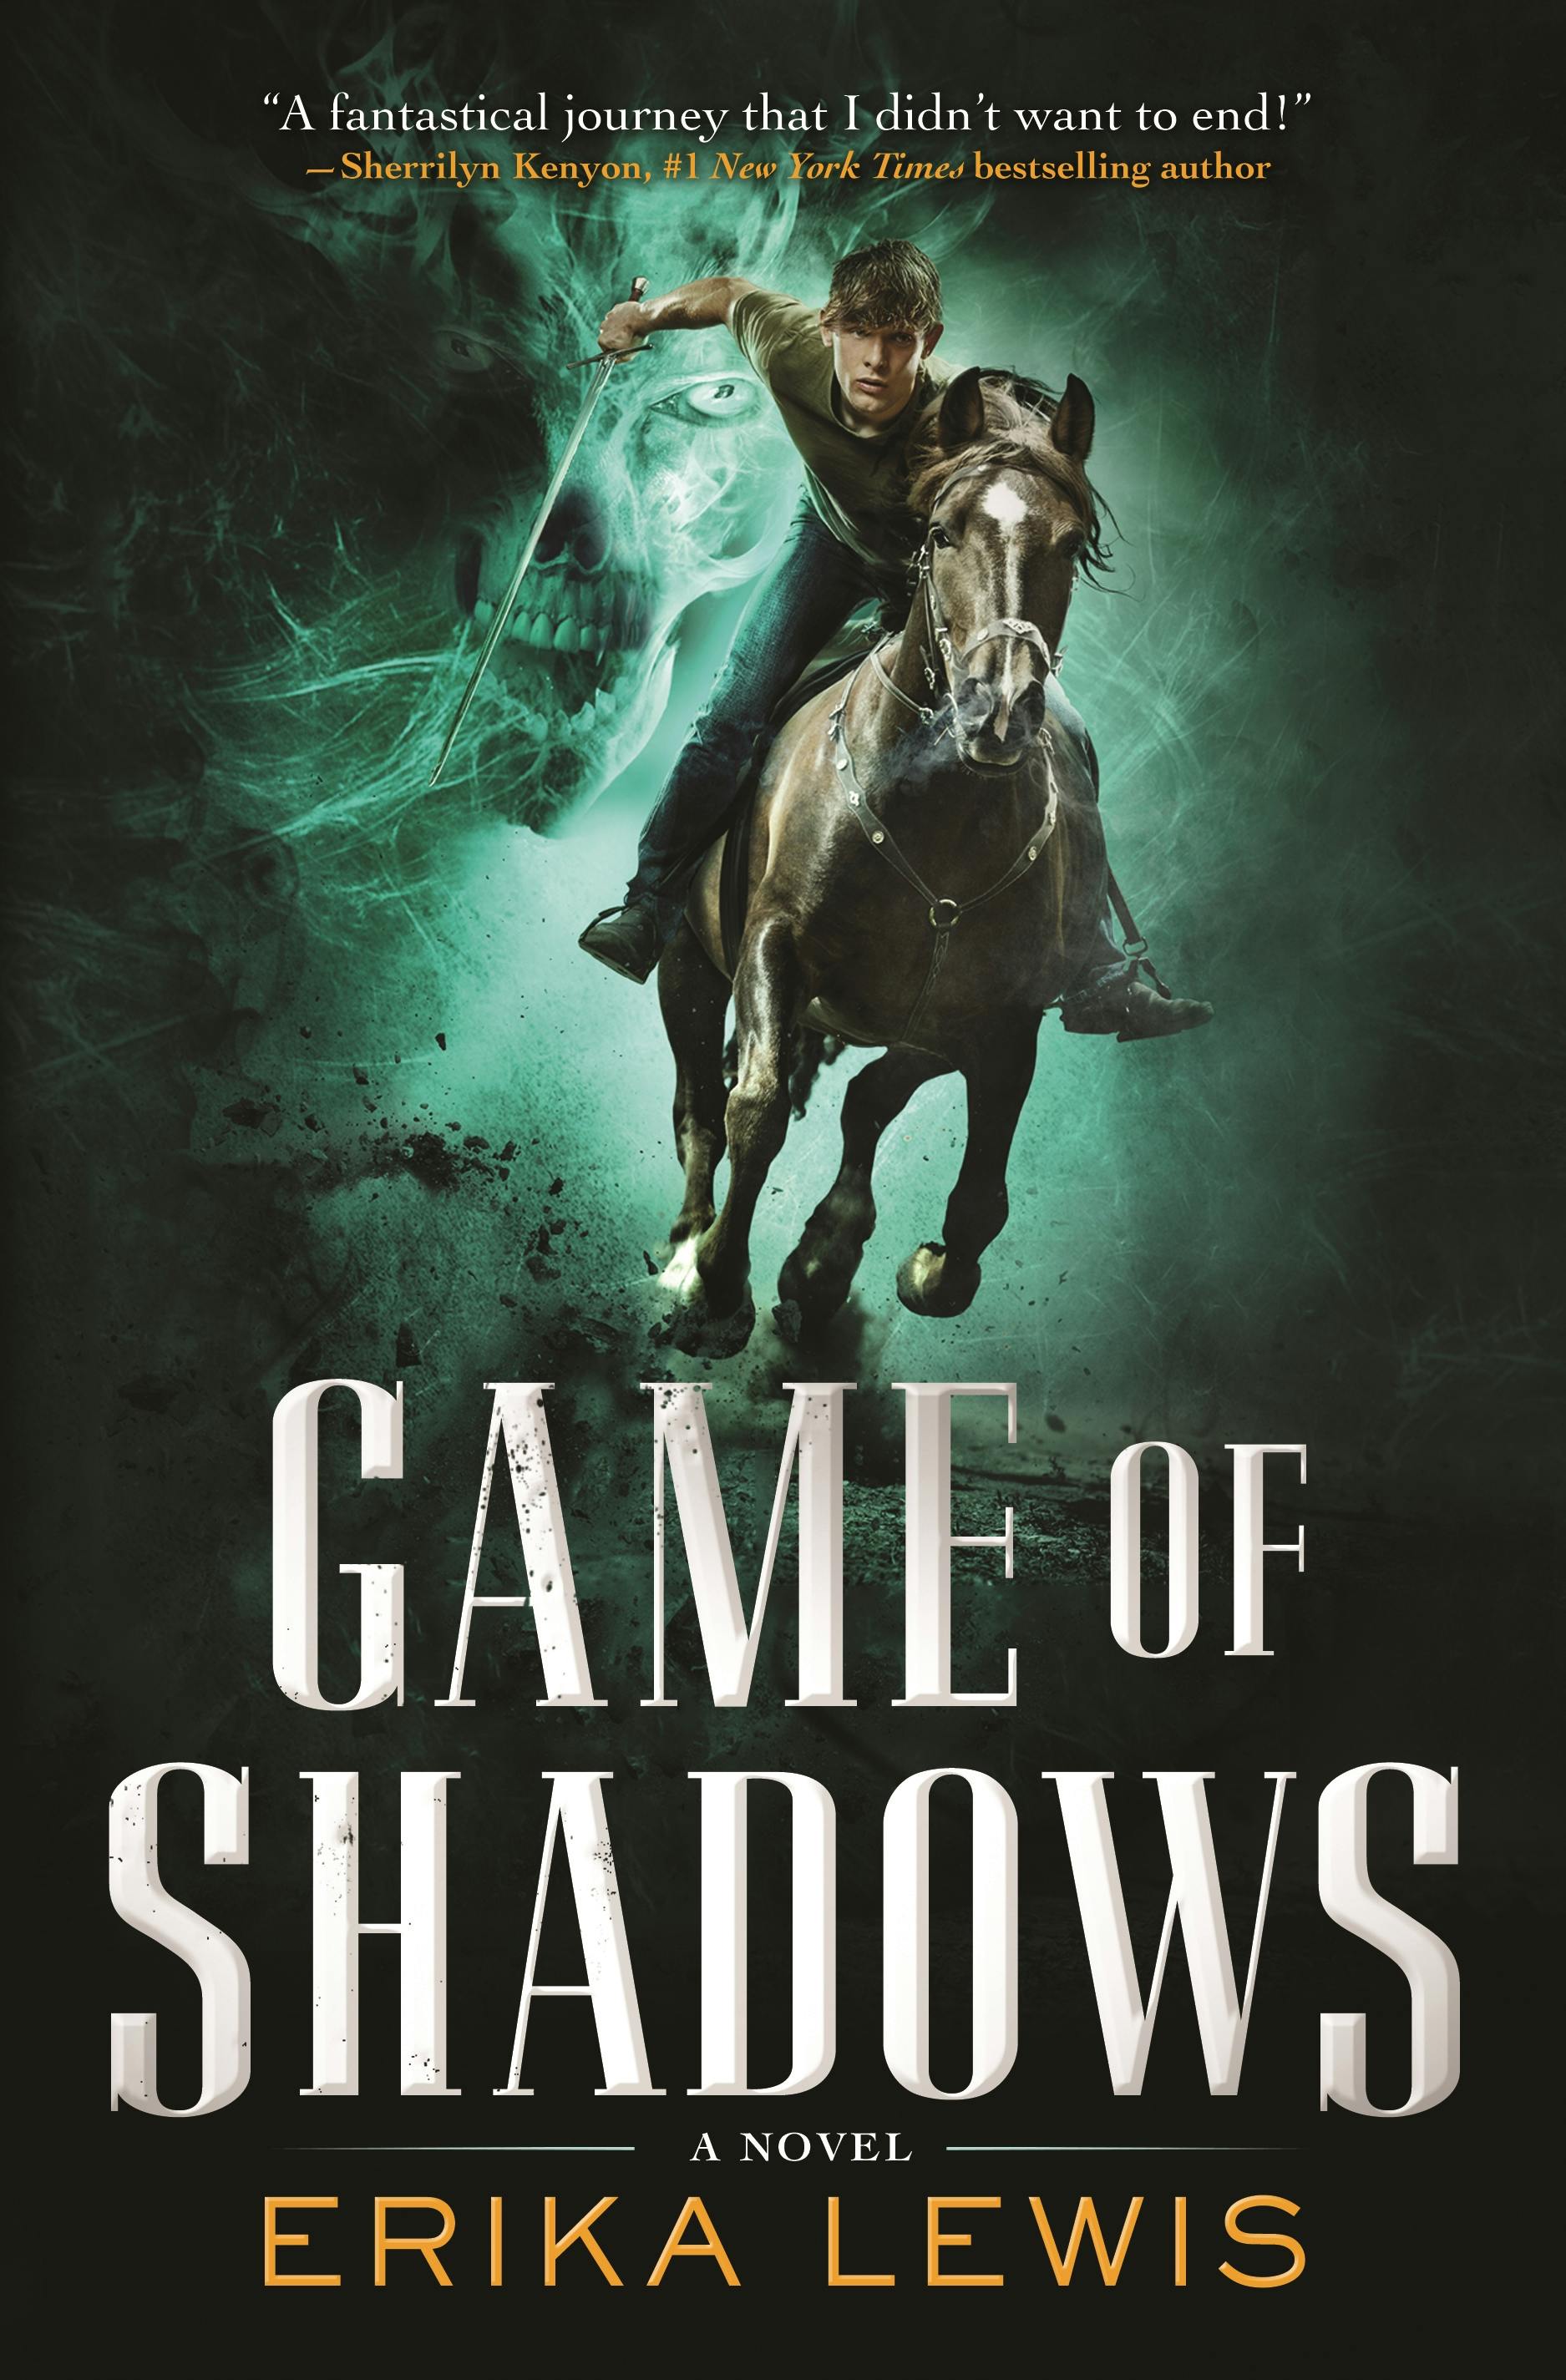 Cover for the book titled as: Game of Shadows